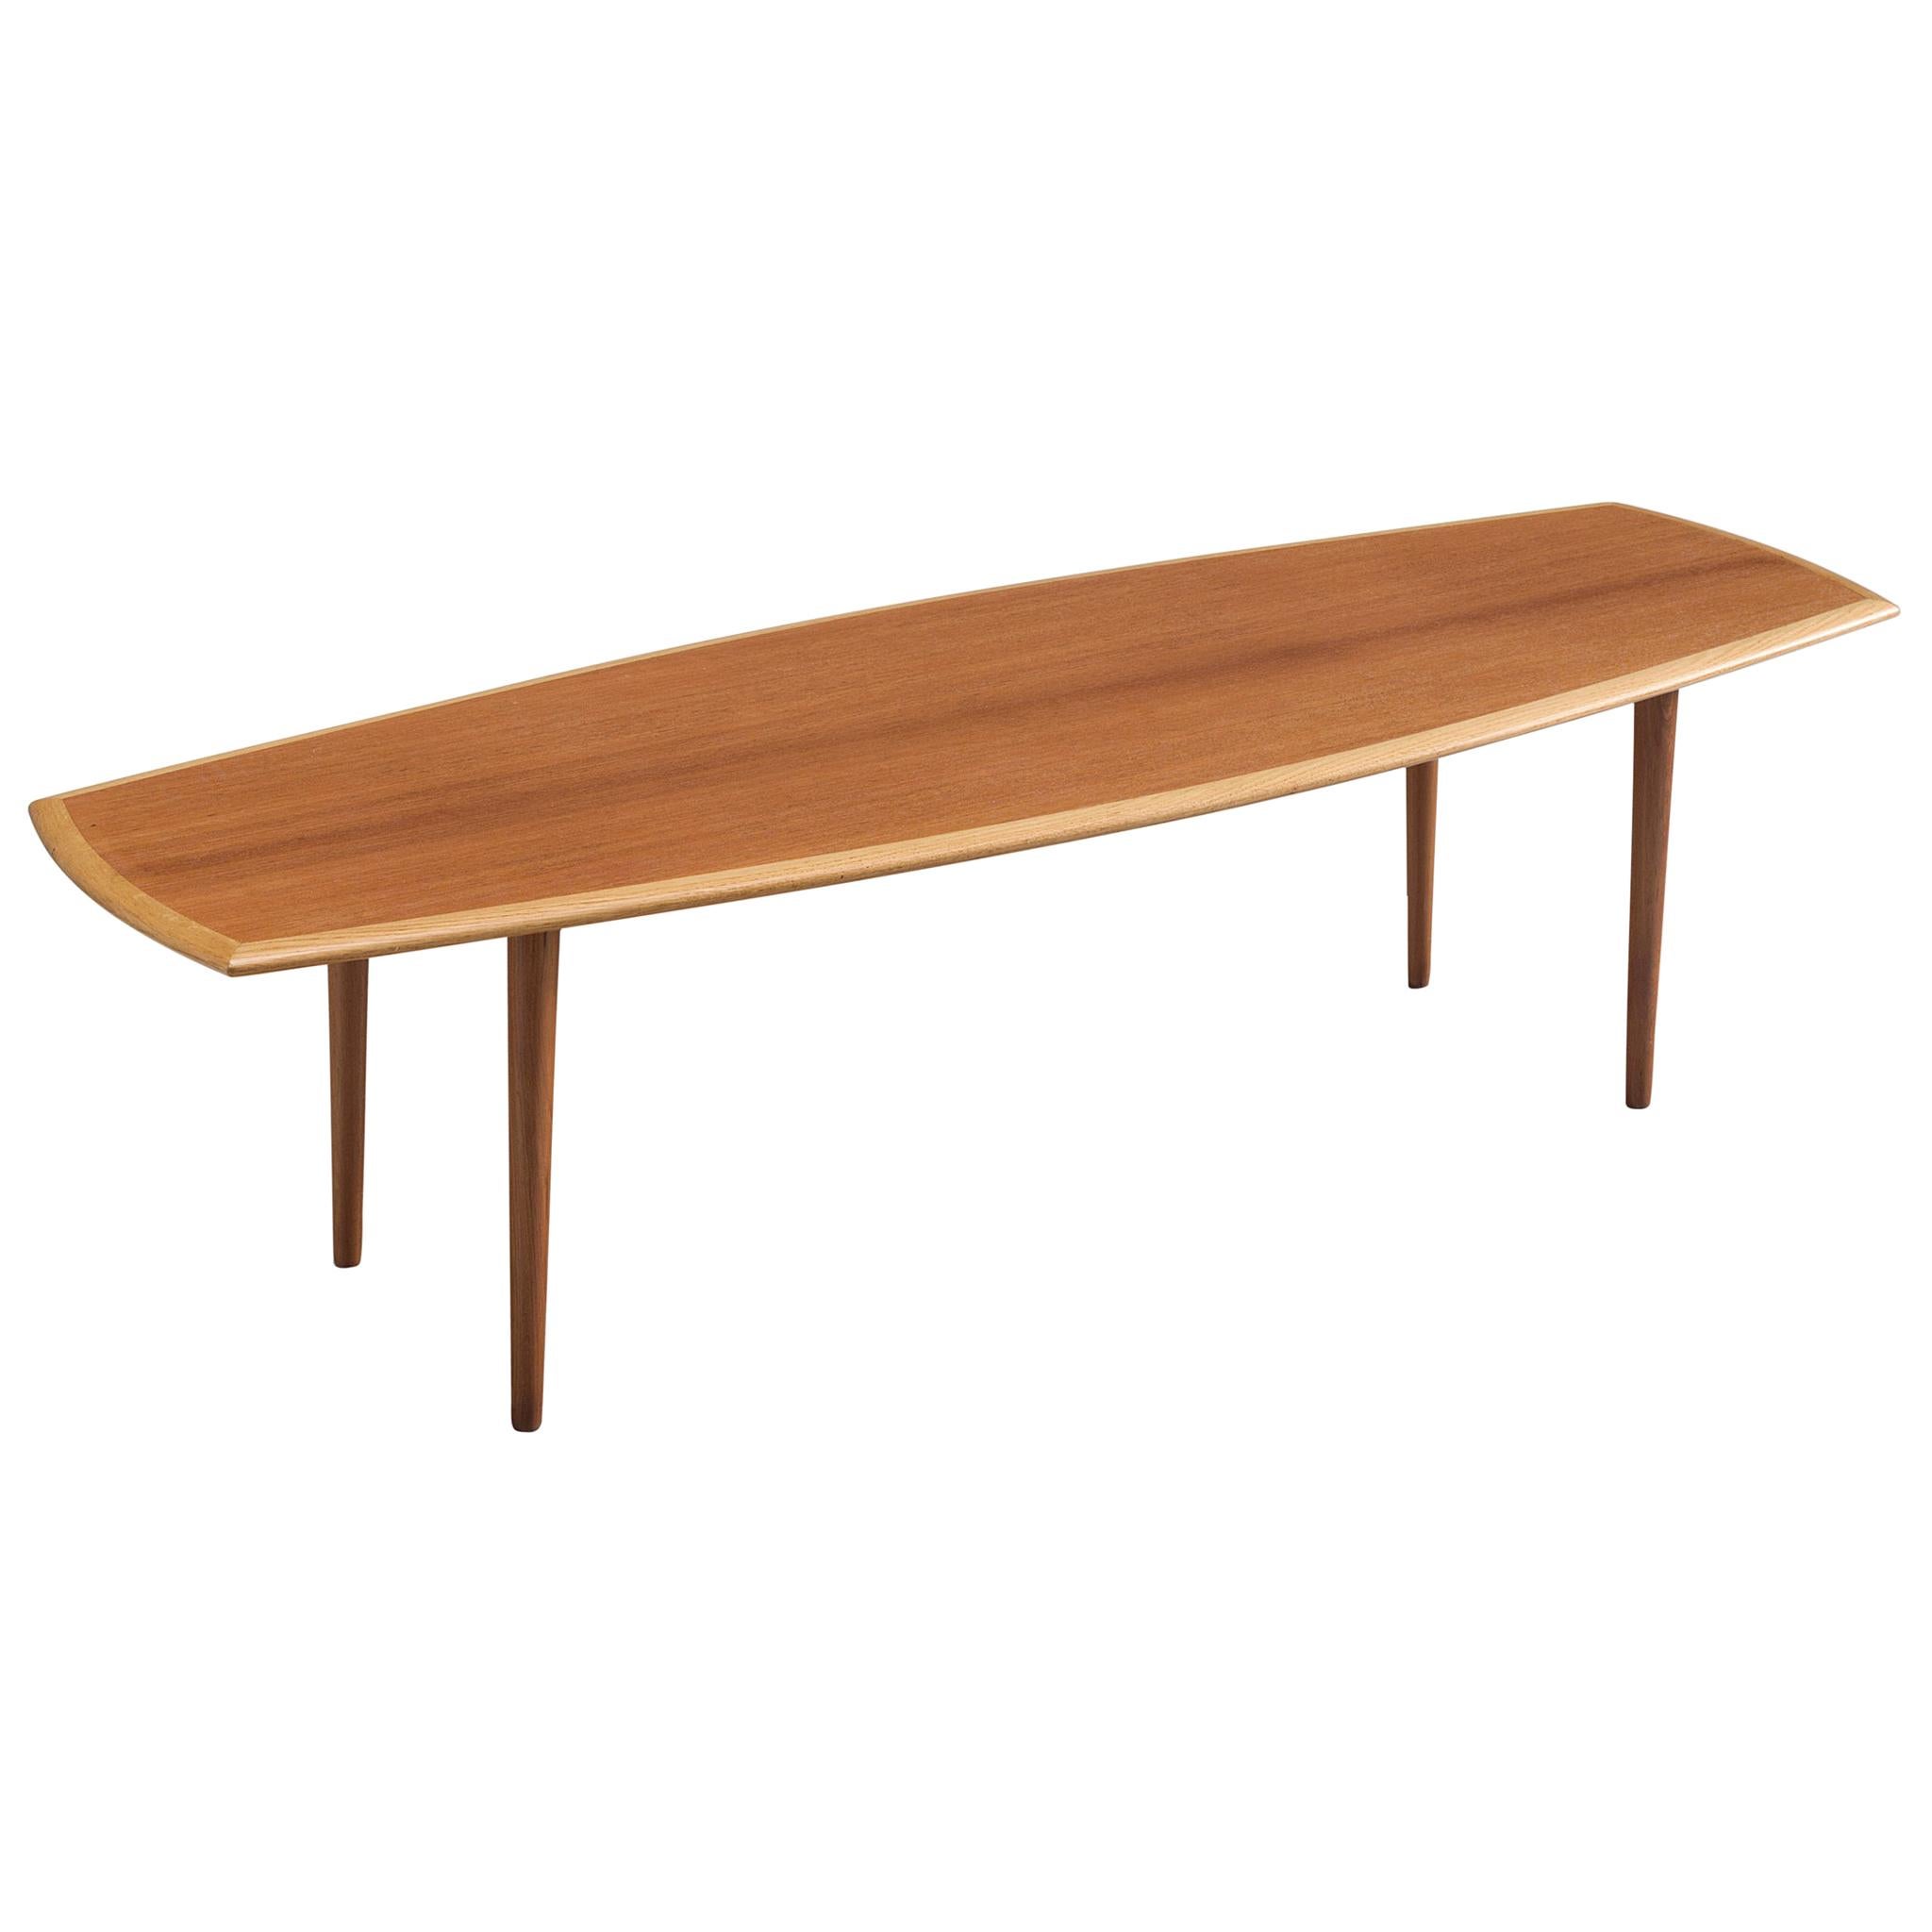 Danish Barrel Shaped Coffee Table in Oak and Teak For Sale at 1stDibs